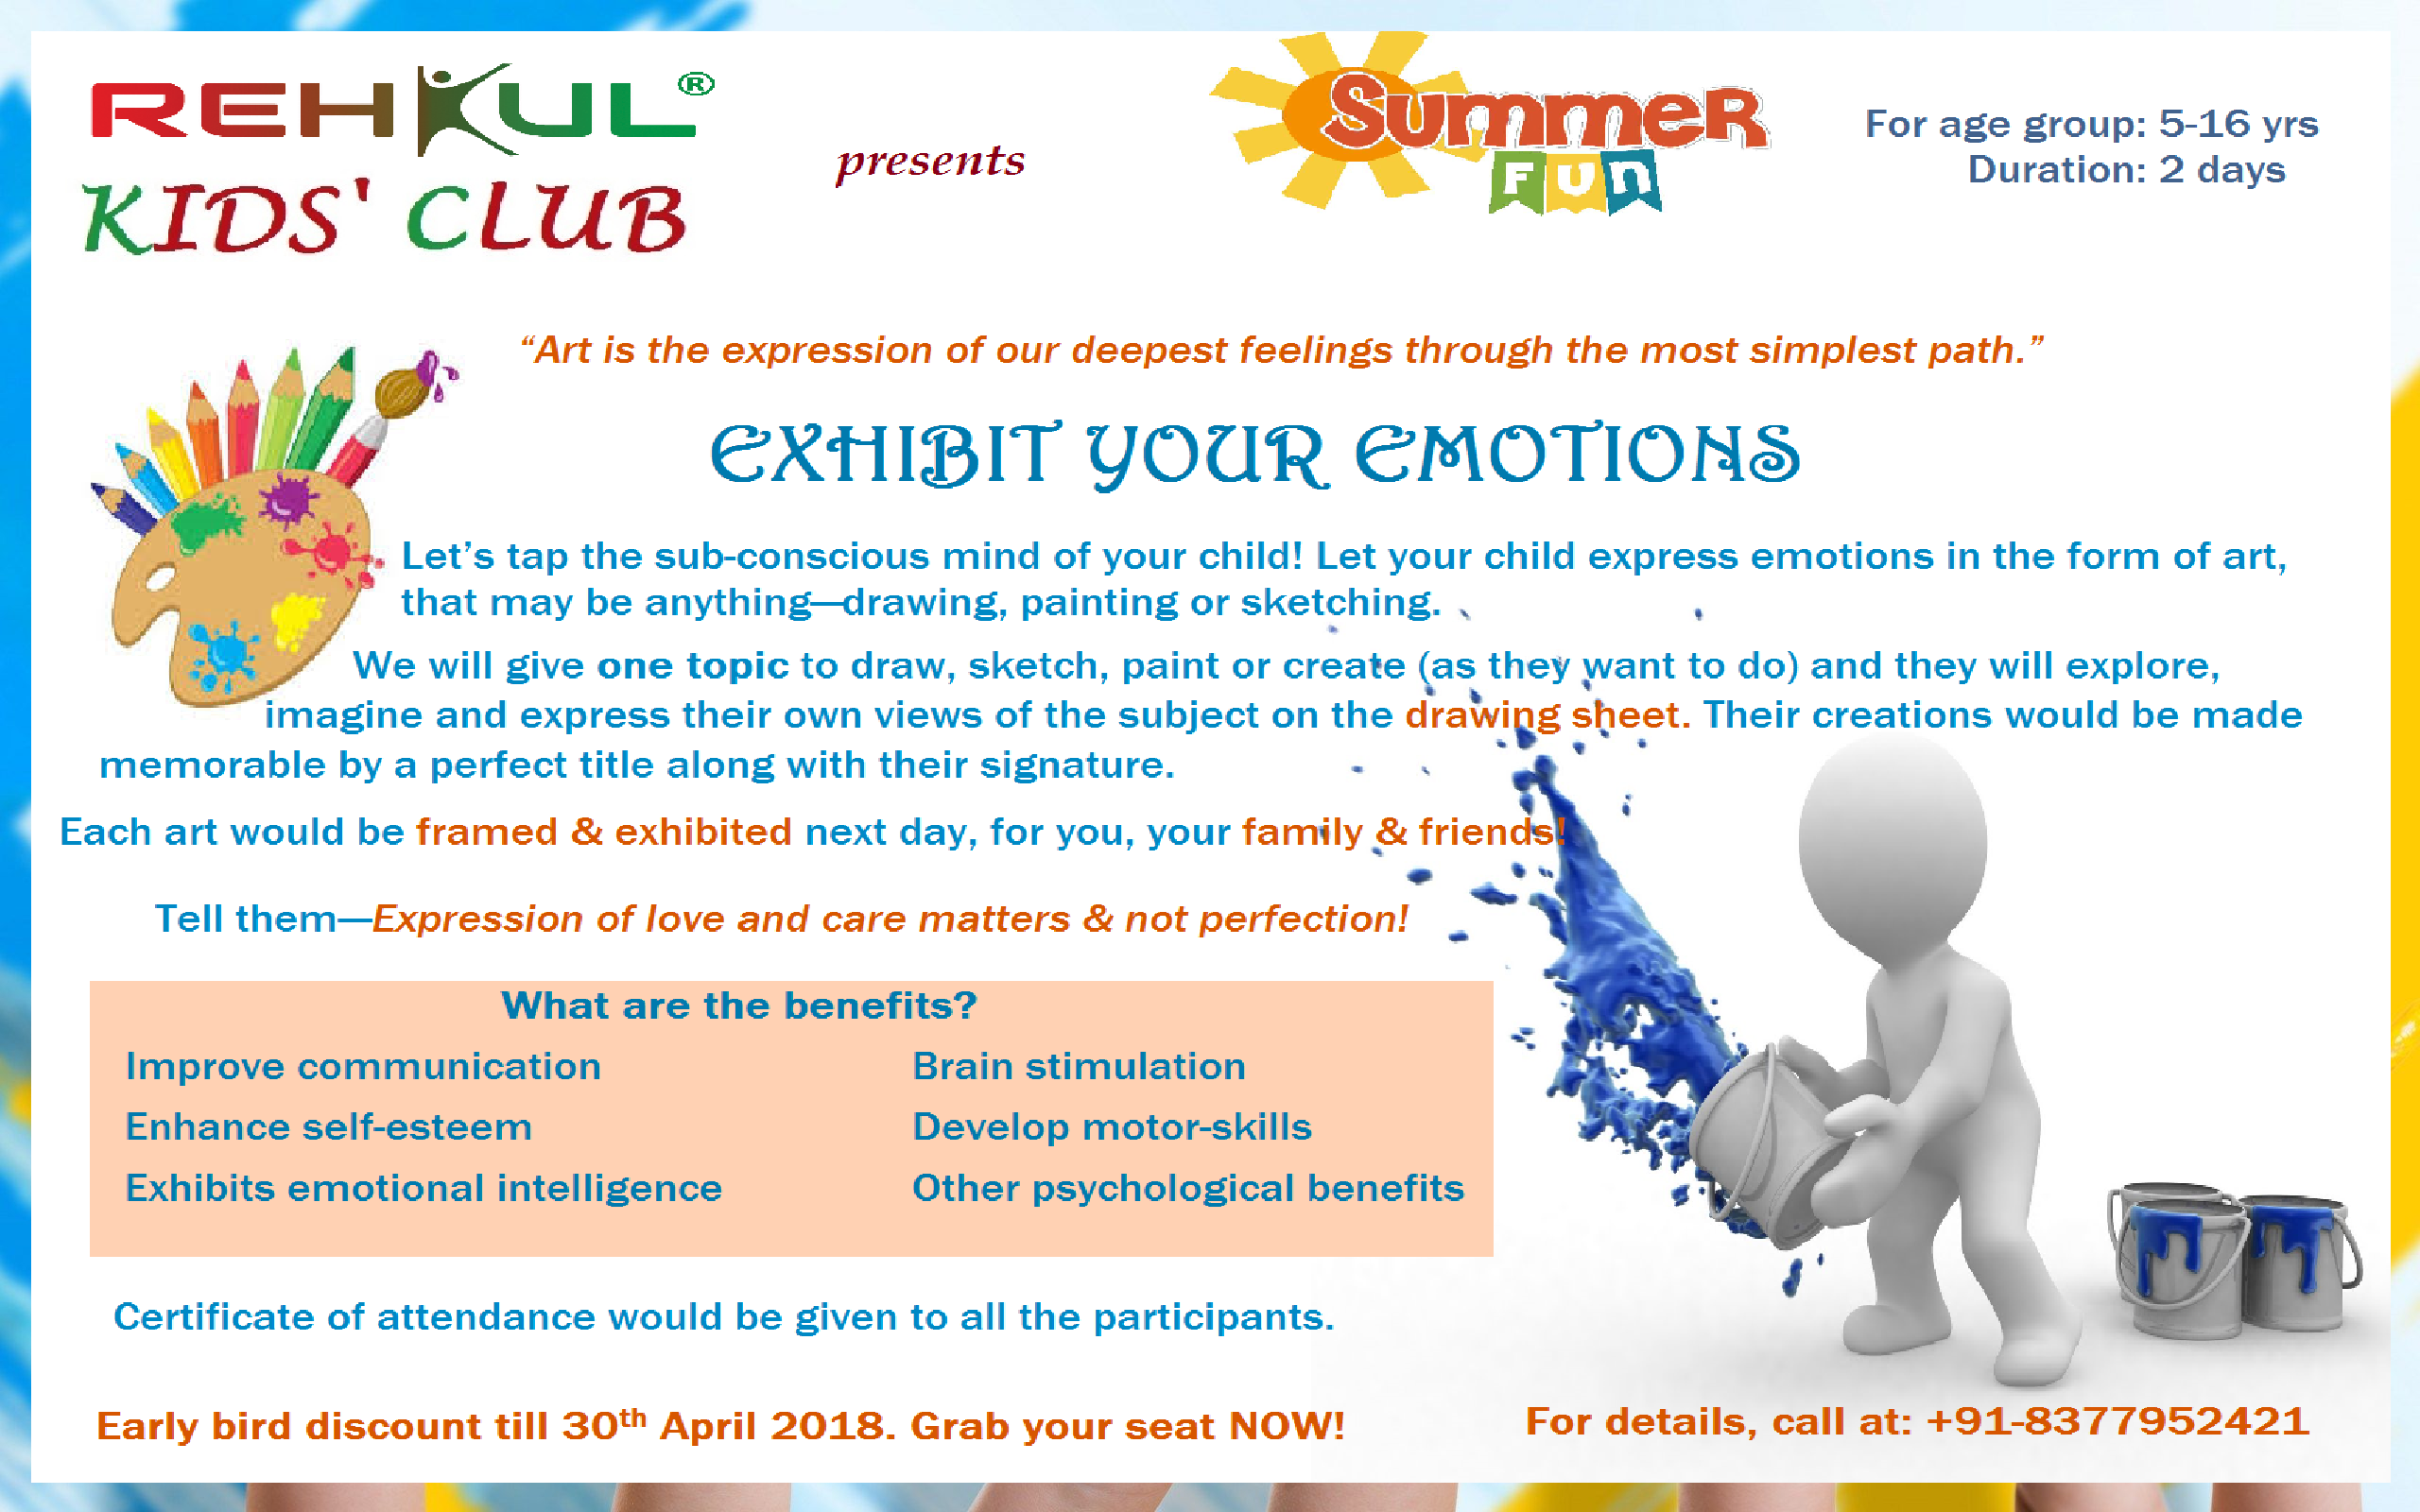 Exhibit Your Emotions: For a Cause